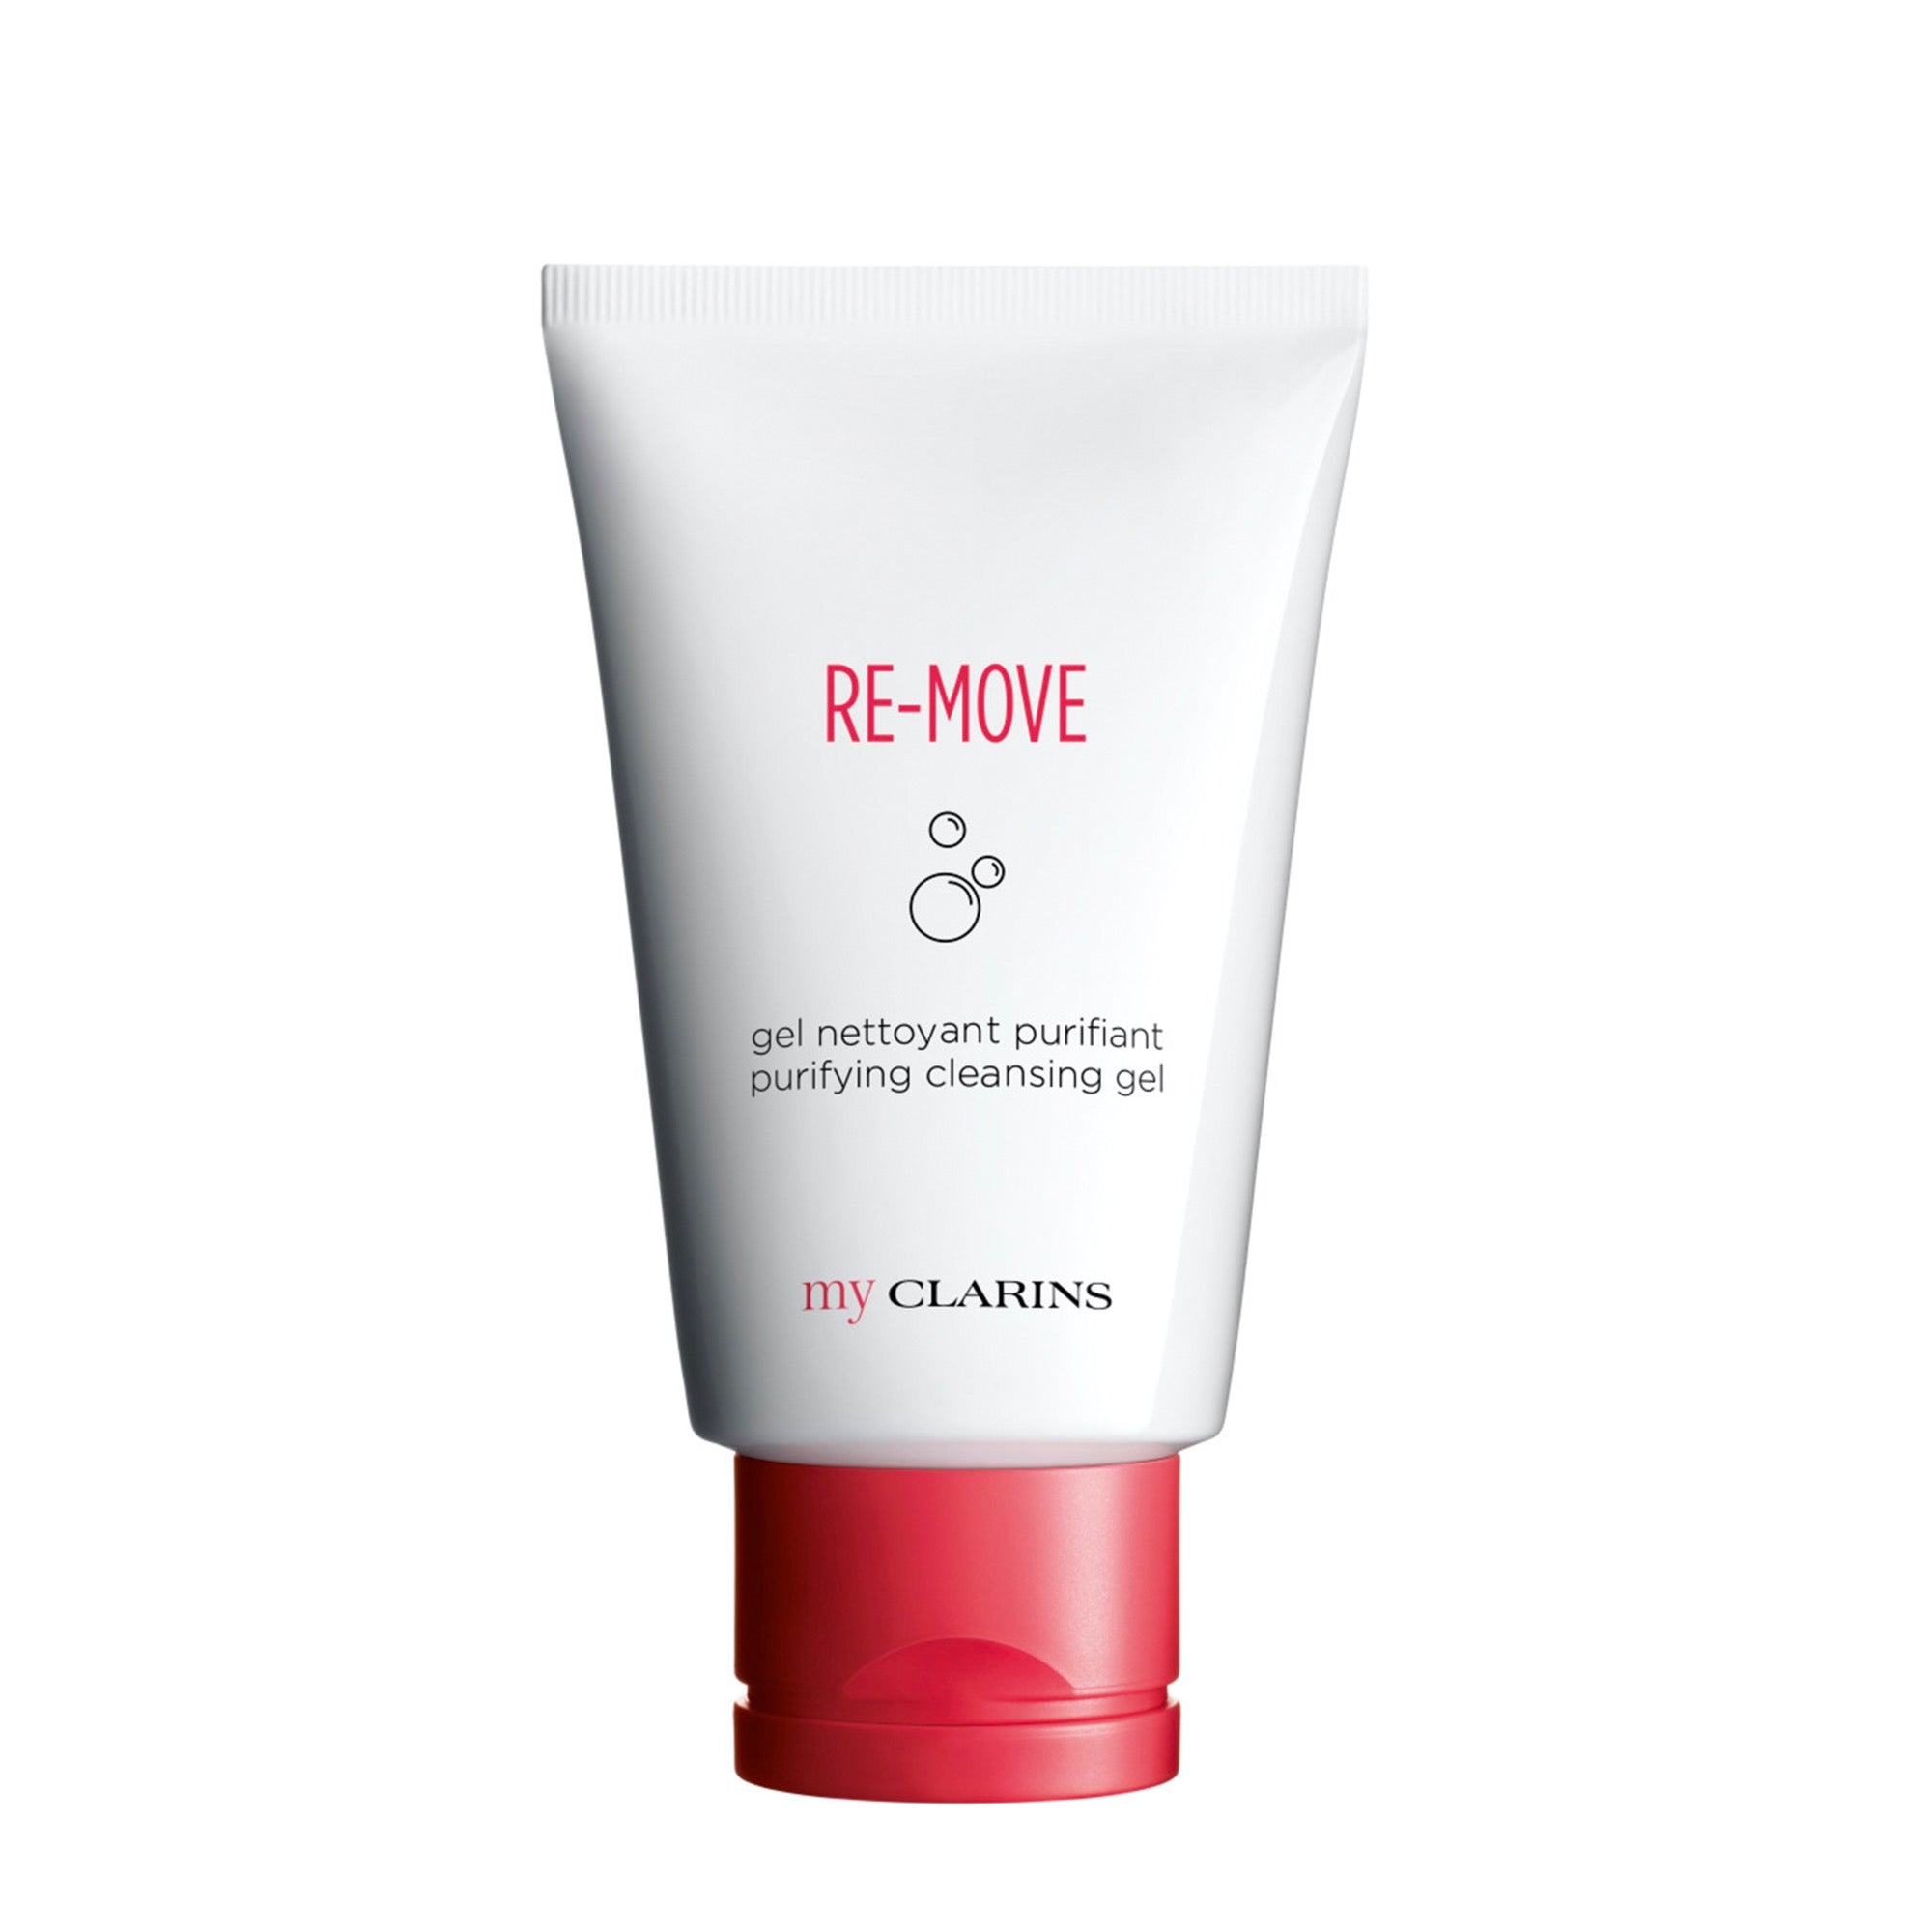 My Clarins RE-MOVE Purifying Cleansing Gel 125ML